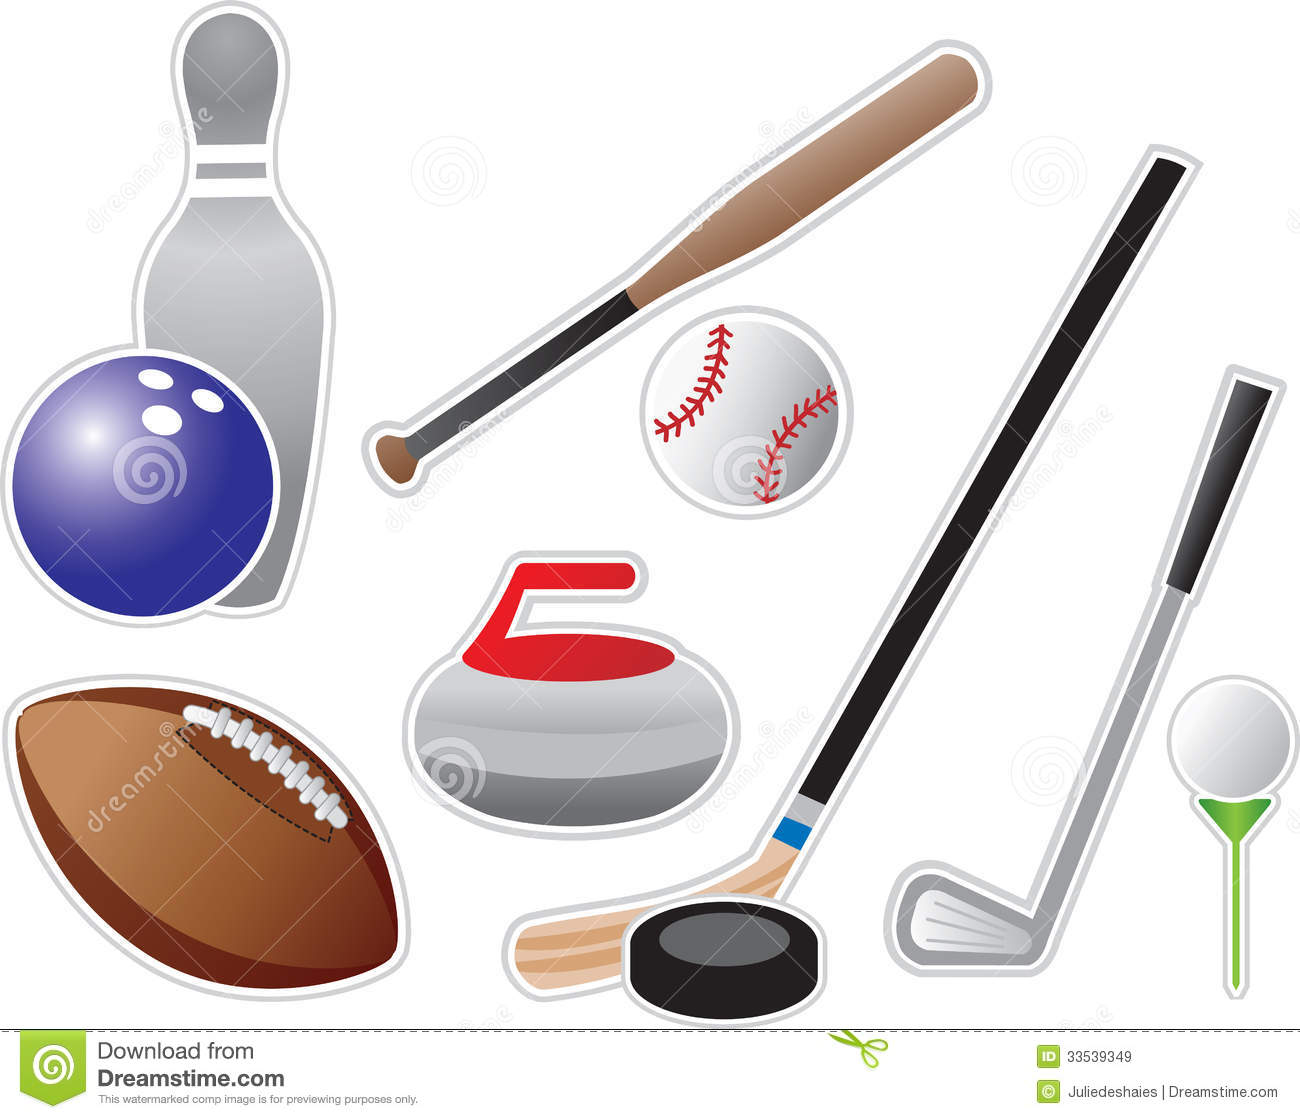 Sports Equipment Royalty Free Stock Images   Image  33539349